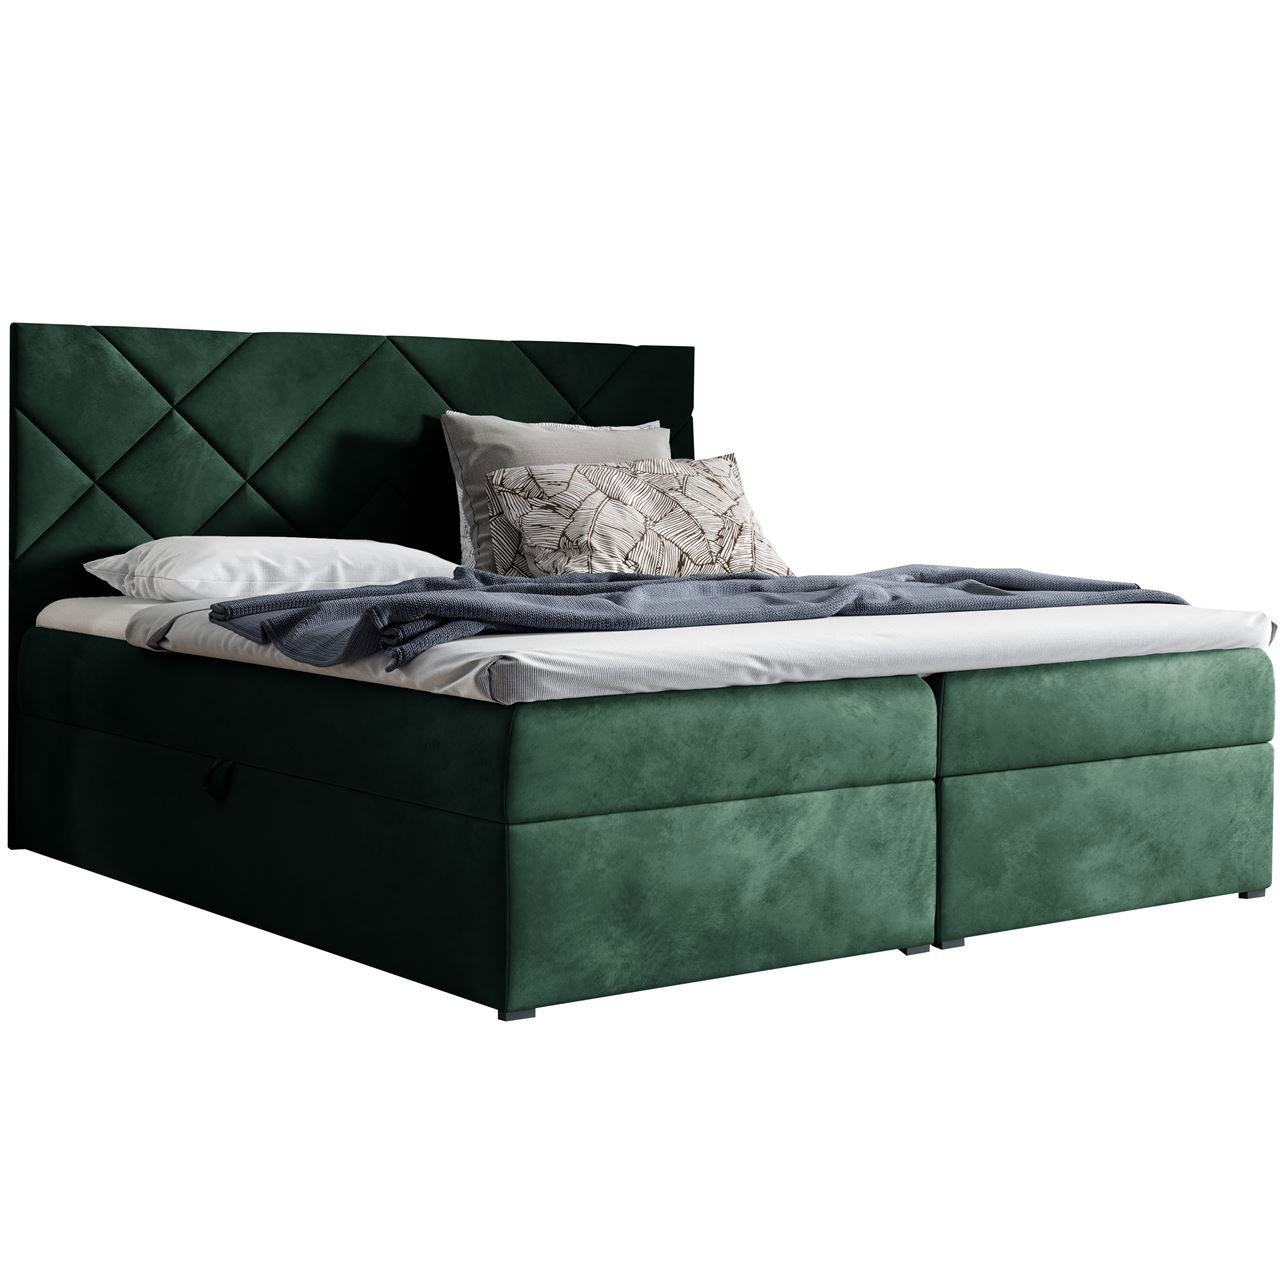 Upholstered bed PEONIA 180x200 fresh 13